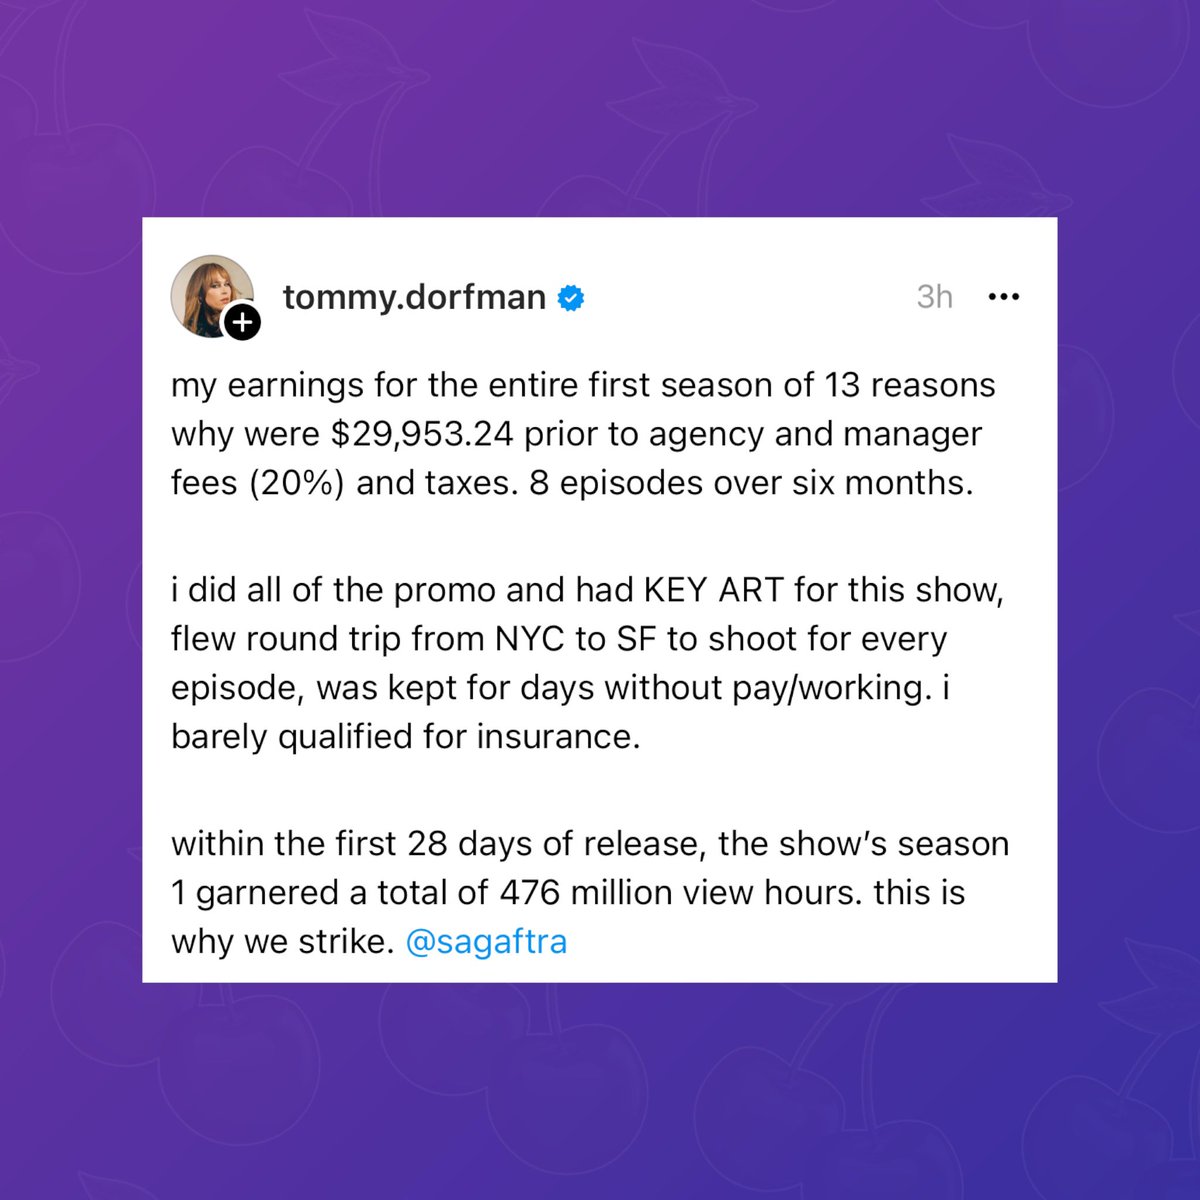 ‘13 Reasons Why’ star Tommy Dorfman reveals her earnings for the entire first season of the hit show were $29,953 and she barely qualified for insurance: “within the first 28 days of release, the show’s season 1 garnered a total of 476 million view hours. this is why we strike.”